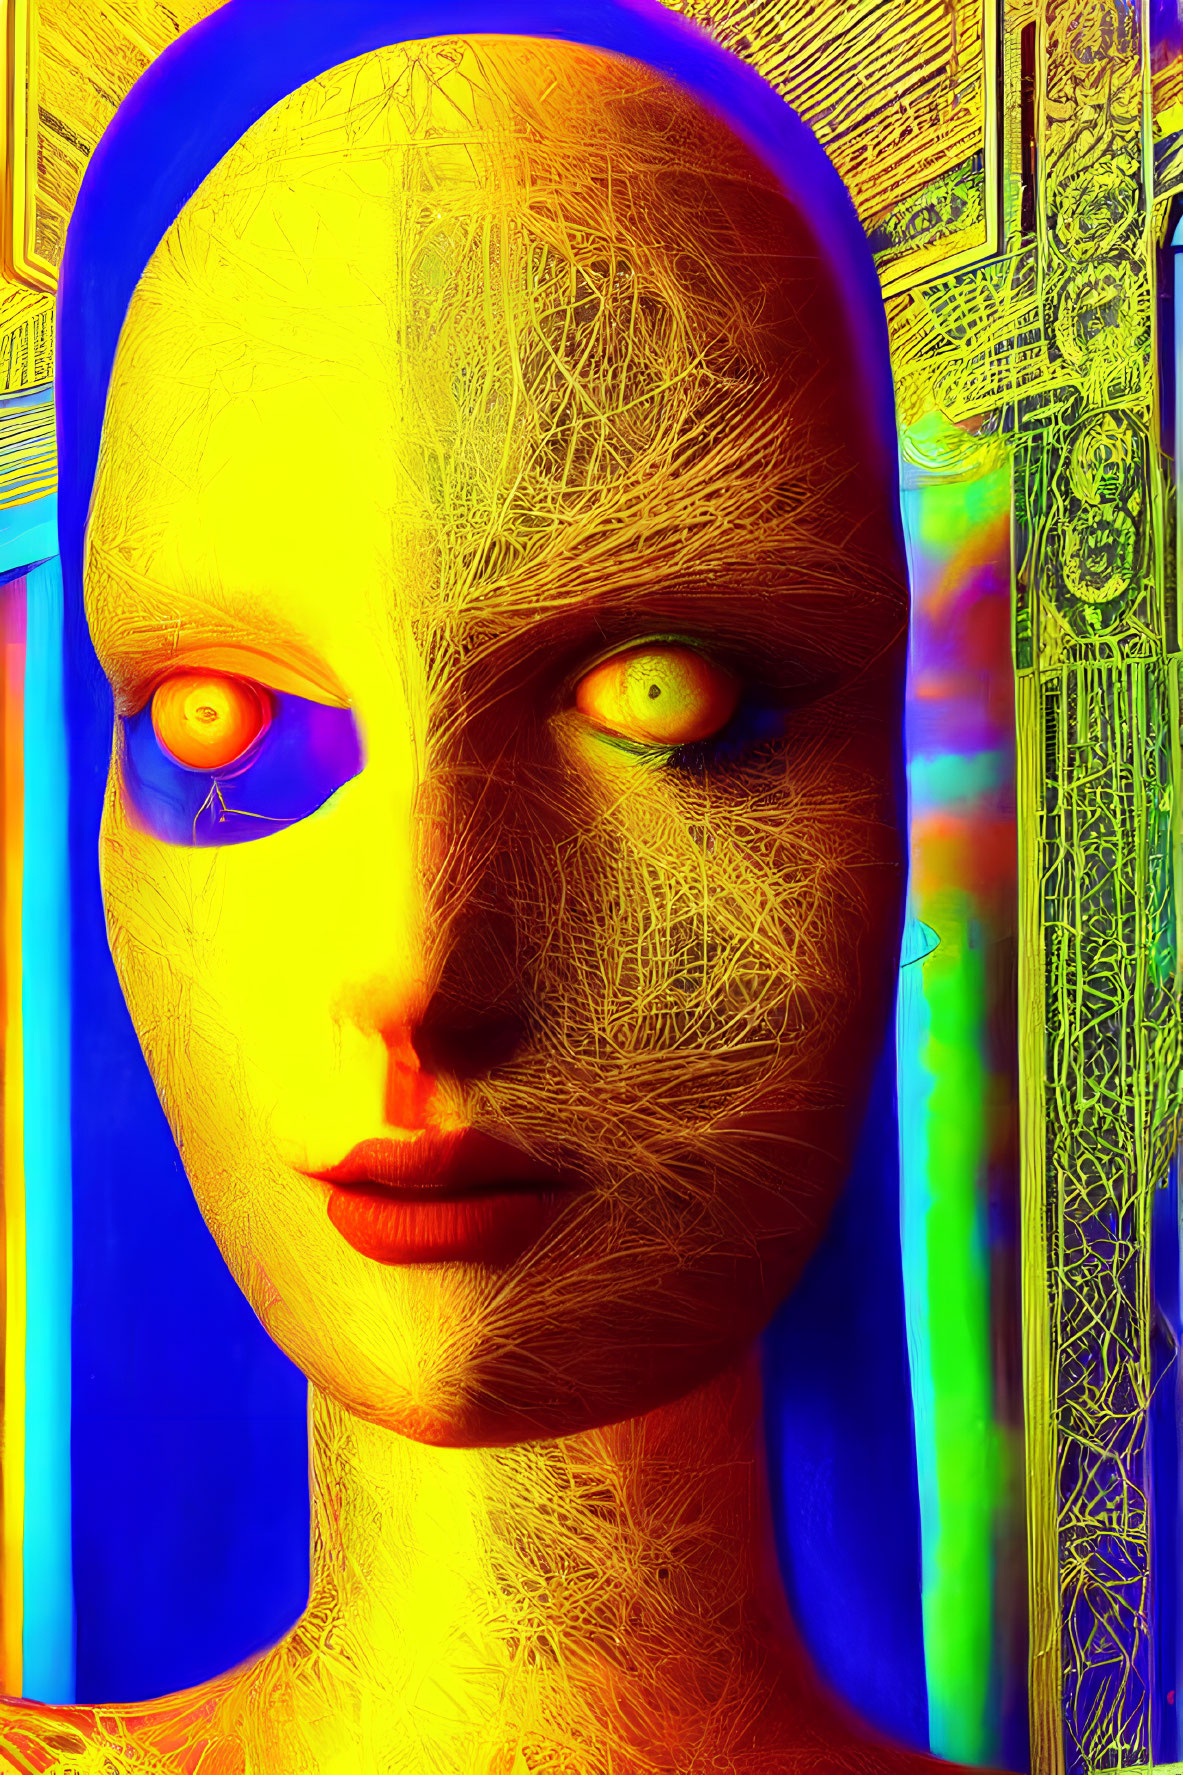 Surreal portrait featuring figure with blue headscarf, golden skin, and multicolored eyes